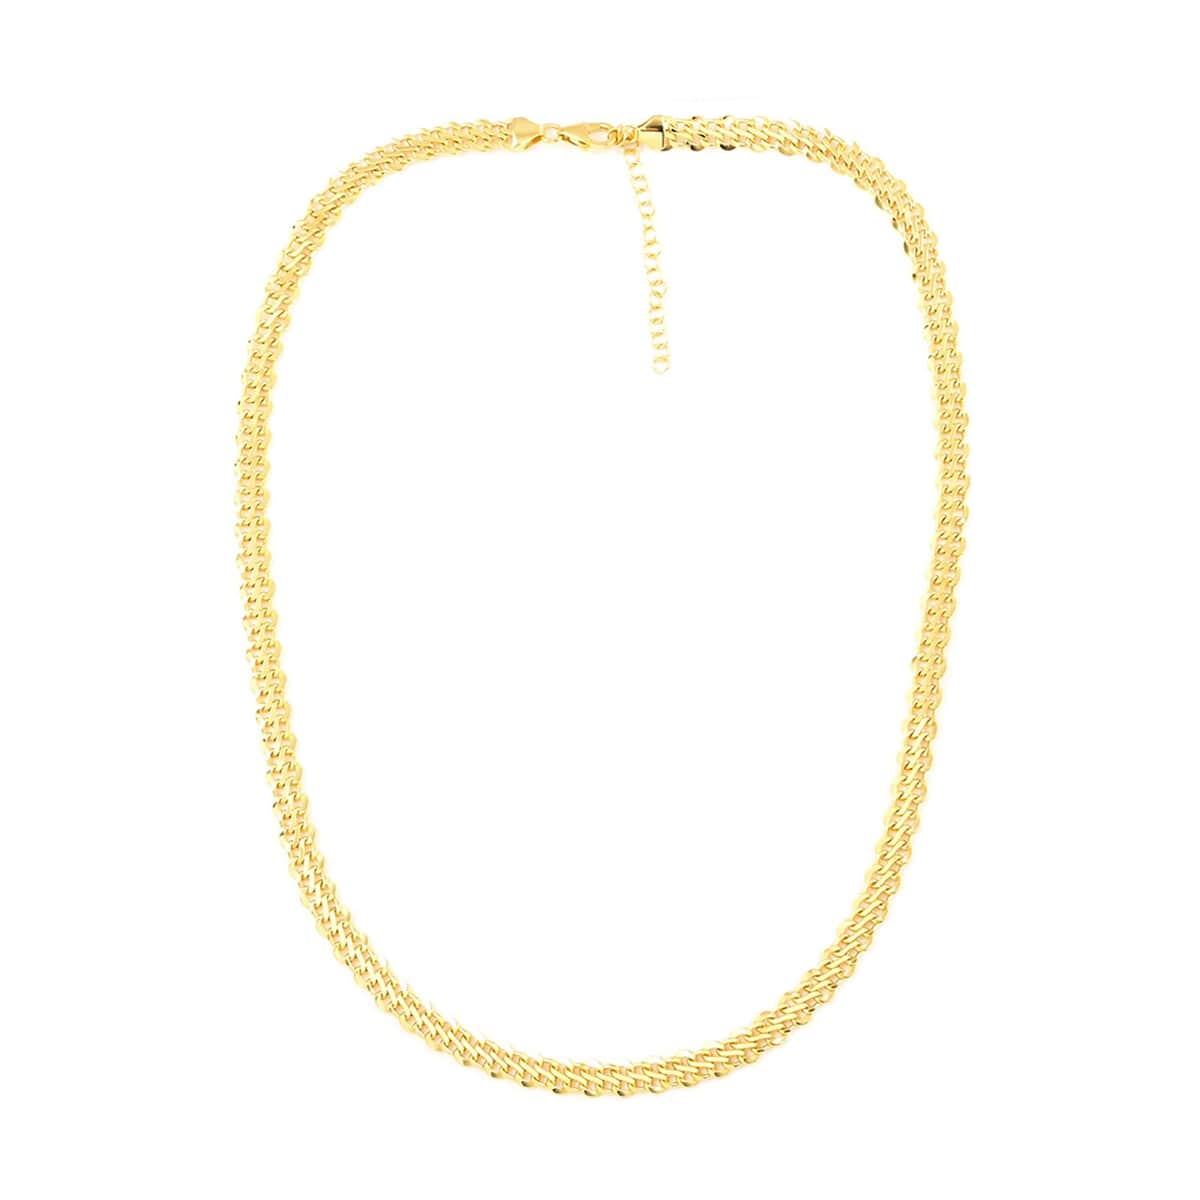 Maestro Gold Collection Italian 10K Yellow Gold 6.1mm Diamond-Cut Royal Infinity Necklace 18-20 Inches 8.0 Grams image number 2